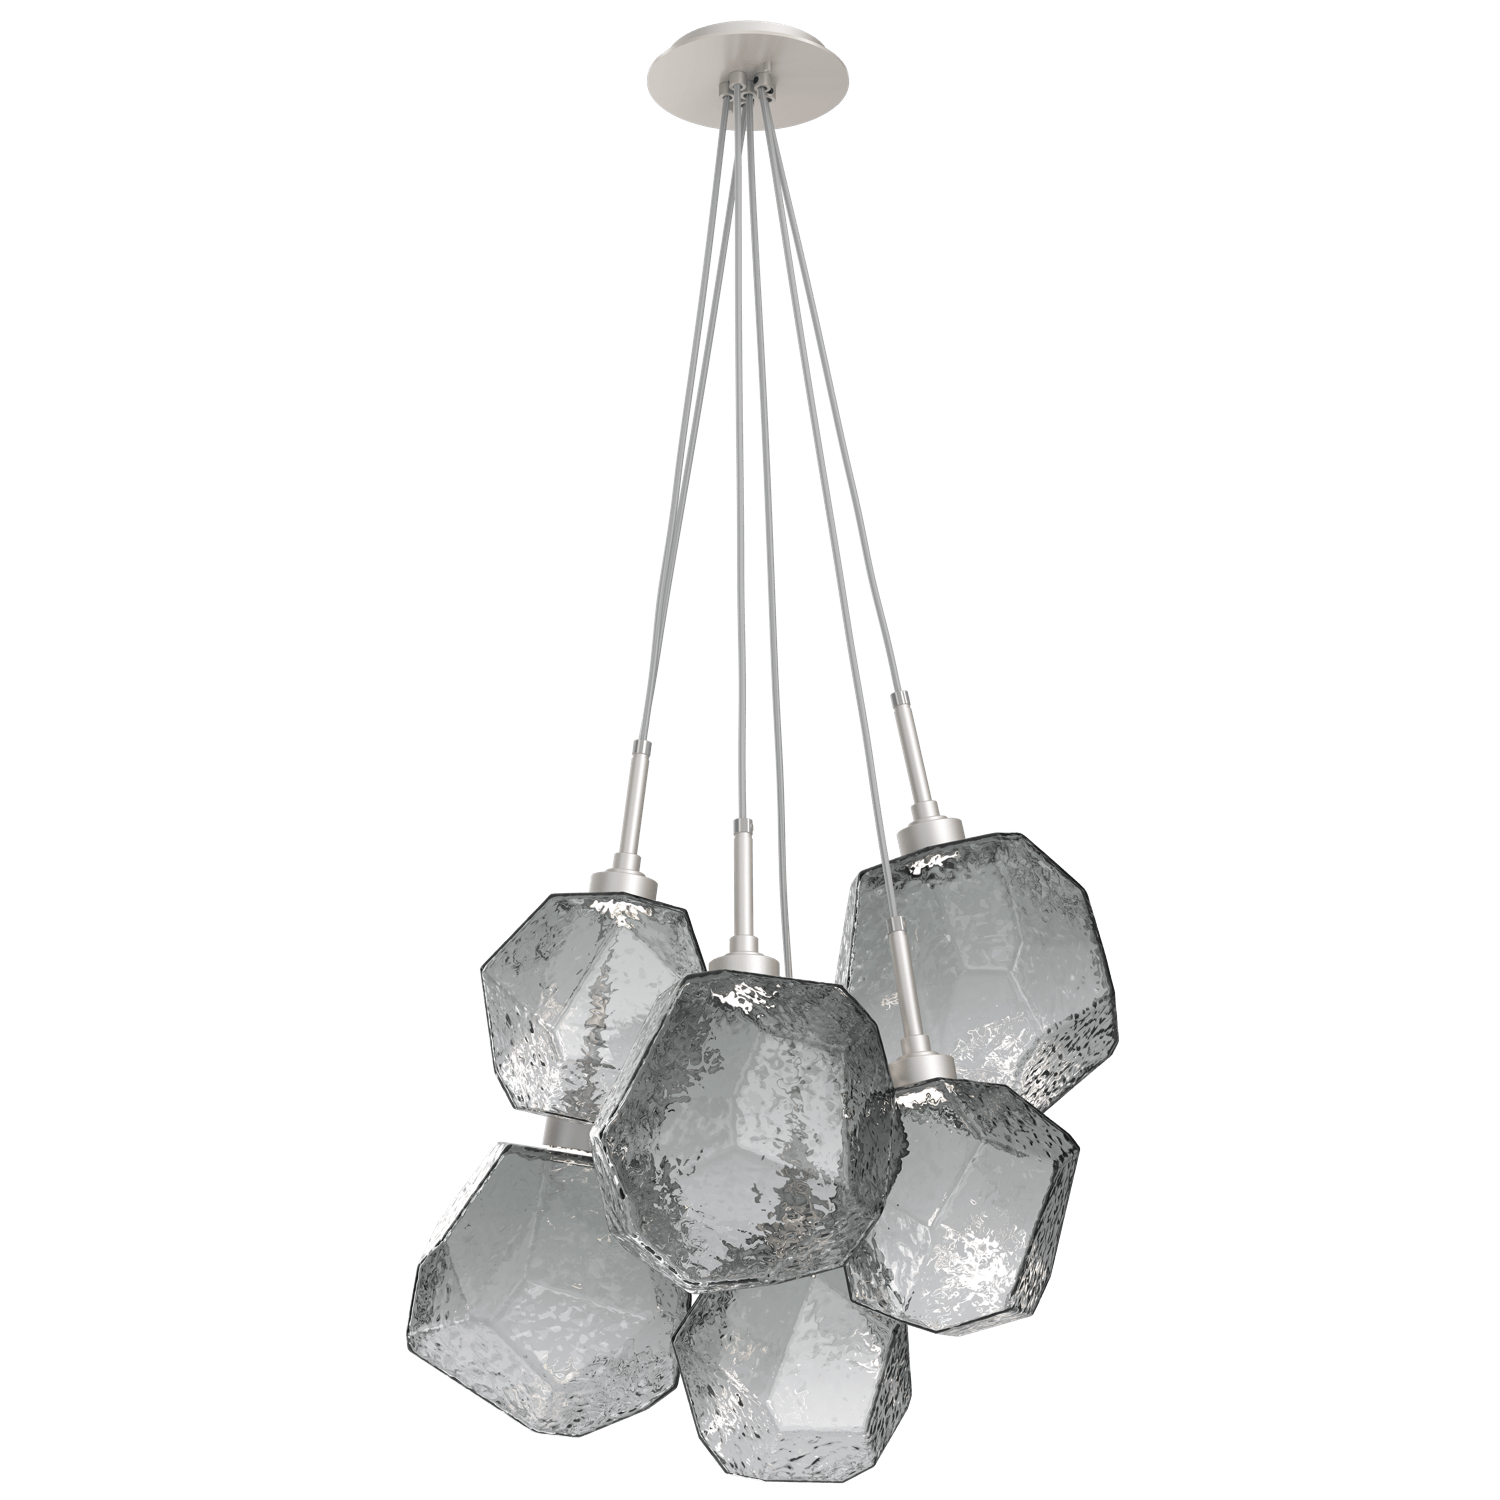 CHB0039-0F-BS-S-Hammerton-Studio-Gem-6-light-cluster-pendant-light-with-metallic-beige-silver-finish-and-smoke-blown-glass-shades-and-LED-lamping